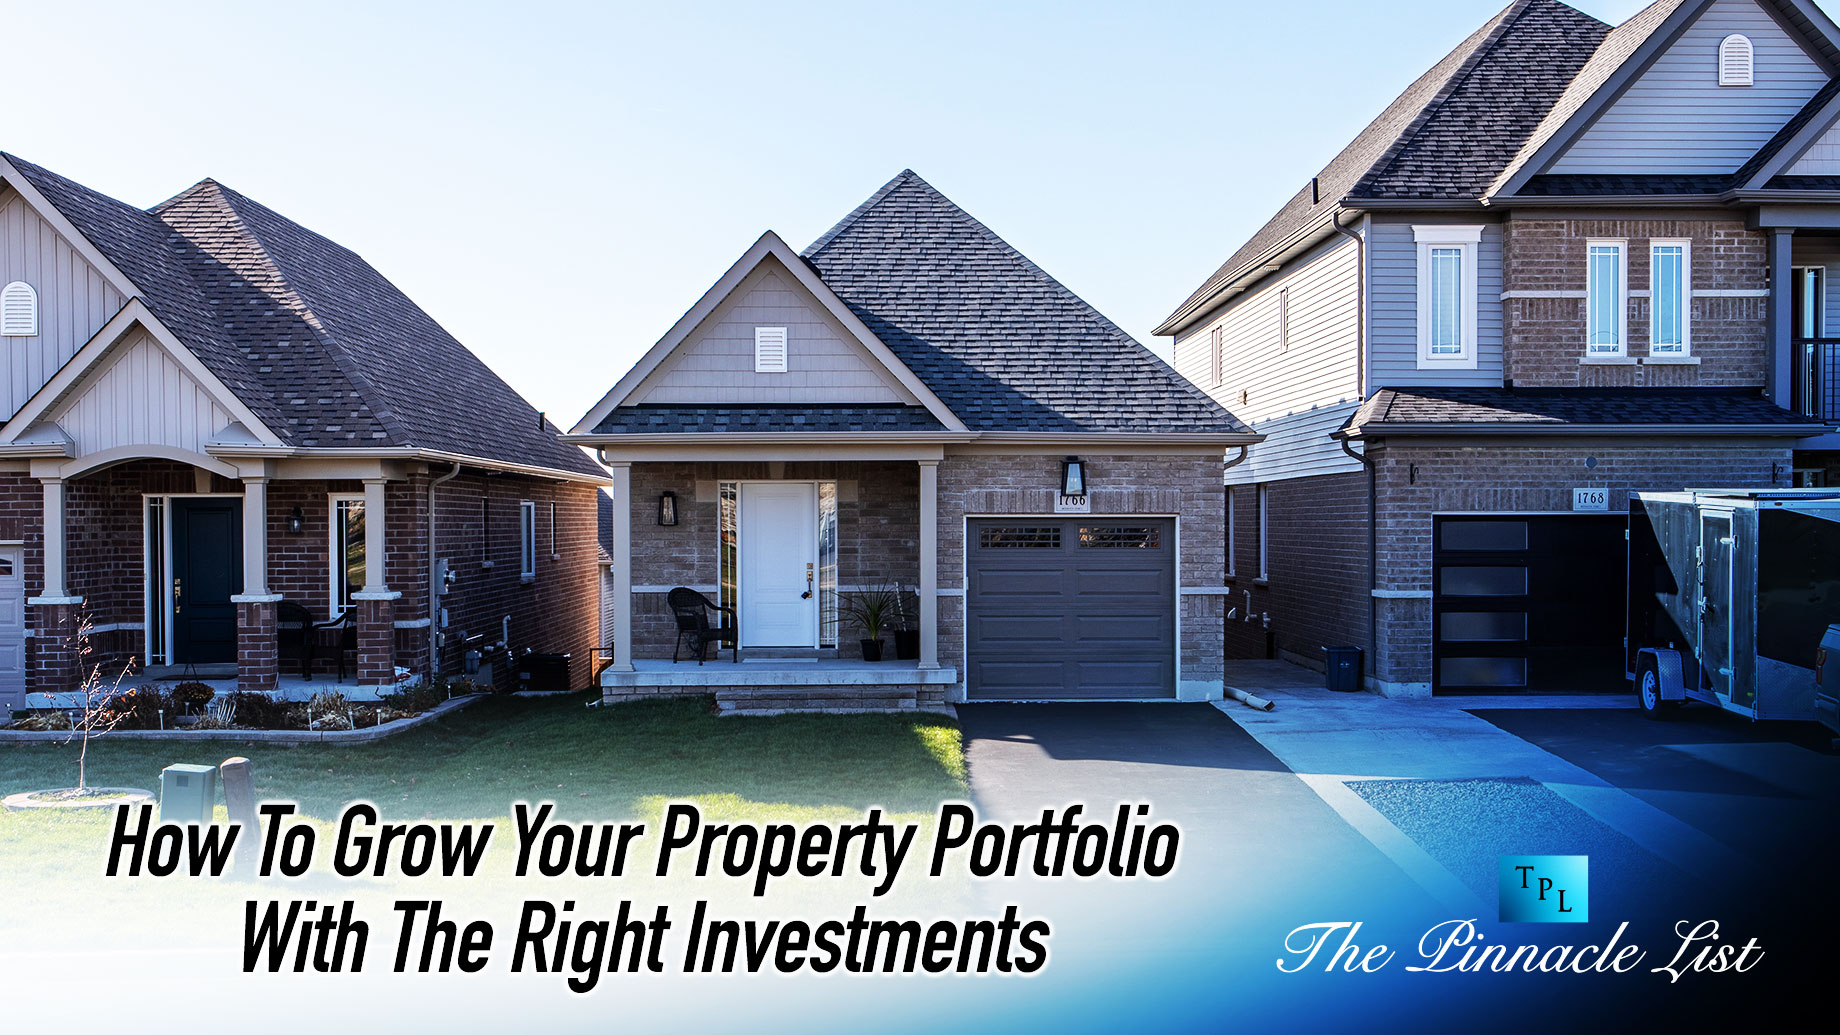 How To Grow Your Property Portfolio With The Right Investments